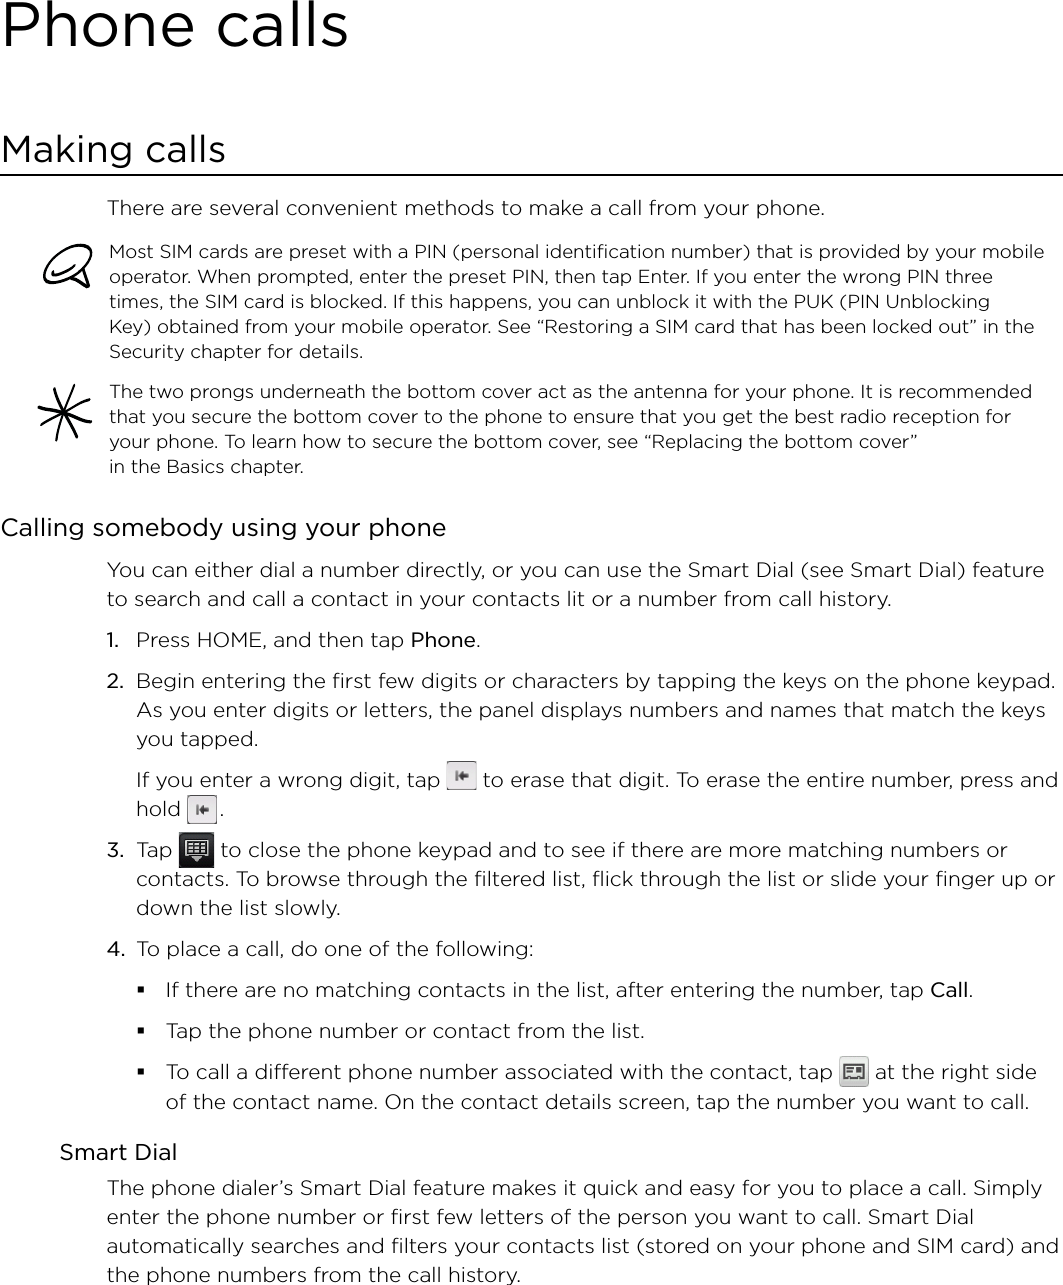 Phone callsMaking callsThere are several convenient methods to make a call from your phone.Most SIM cards are preset with a PIN (personal identification number) that is provided by your mobile operator. When prompted, enter the preset PIN, then tap Enter. If you enter the wrong PIN three times, the SIM card is blocked. If this happens, you can unblock it with the PUK (PIN Unblocking Key) obtained from your mobile operator. See “Restoring a SIM card that has been locked out” in the Security chapter for details. The two prongs underneath the bottom cover act as the antenna for your phone. It is recommended that you secure the bottom cover to the phone to ensure that you get the best radio reception for your phone. To learn how to secure the bottom cover, see “Replacing the bottom cover”  in the Basics chapter. Calling somebody using your phone You can either dial a number directly, or you can use the Smart Dial (see Smart Dial) feature to search and call a contact in your contacts lit or a number from call history.1.  Press HOME, and then tap Phone.2.  Begin entering the first few digits or characters by tapping the keys on the phone keypad. As you enter digits or letters, the panel displays numbers and names that match the keys you tapped.If you enter a wrong digit, tap   to erase that digit. To erase the entire number, press and hold   .3.  Tap   to close the phone keypad and to see if there are more matching numbers or contacts. To browse through the filtered list, flick through the list or slide your finger up or down the list slowly.4.  To place a call, do one of the following:If there are no matching contacts in the list, after entering the number, tap Call. Tap the phone number or contact from the list.To call a different phone number associated with the contact, tap   at the right side of the contact name. On the contact details screen, tap the number you want to call.Smart DialThe phone dialer’s Smart Dial feature makes it quick and easy for you to place a call. Simply enter the phone number or first few letters of the person you want to call. Smart Dial automatically searches and filters your contacts list (stored on your phone and SIM card) and the phone numbers from the call history.